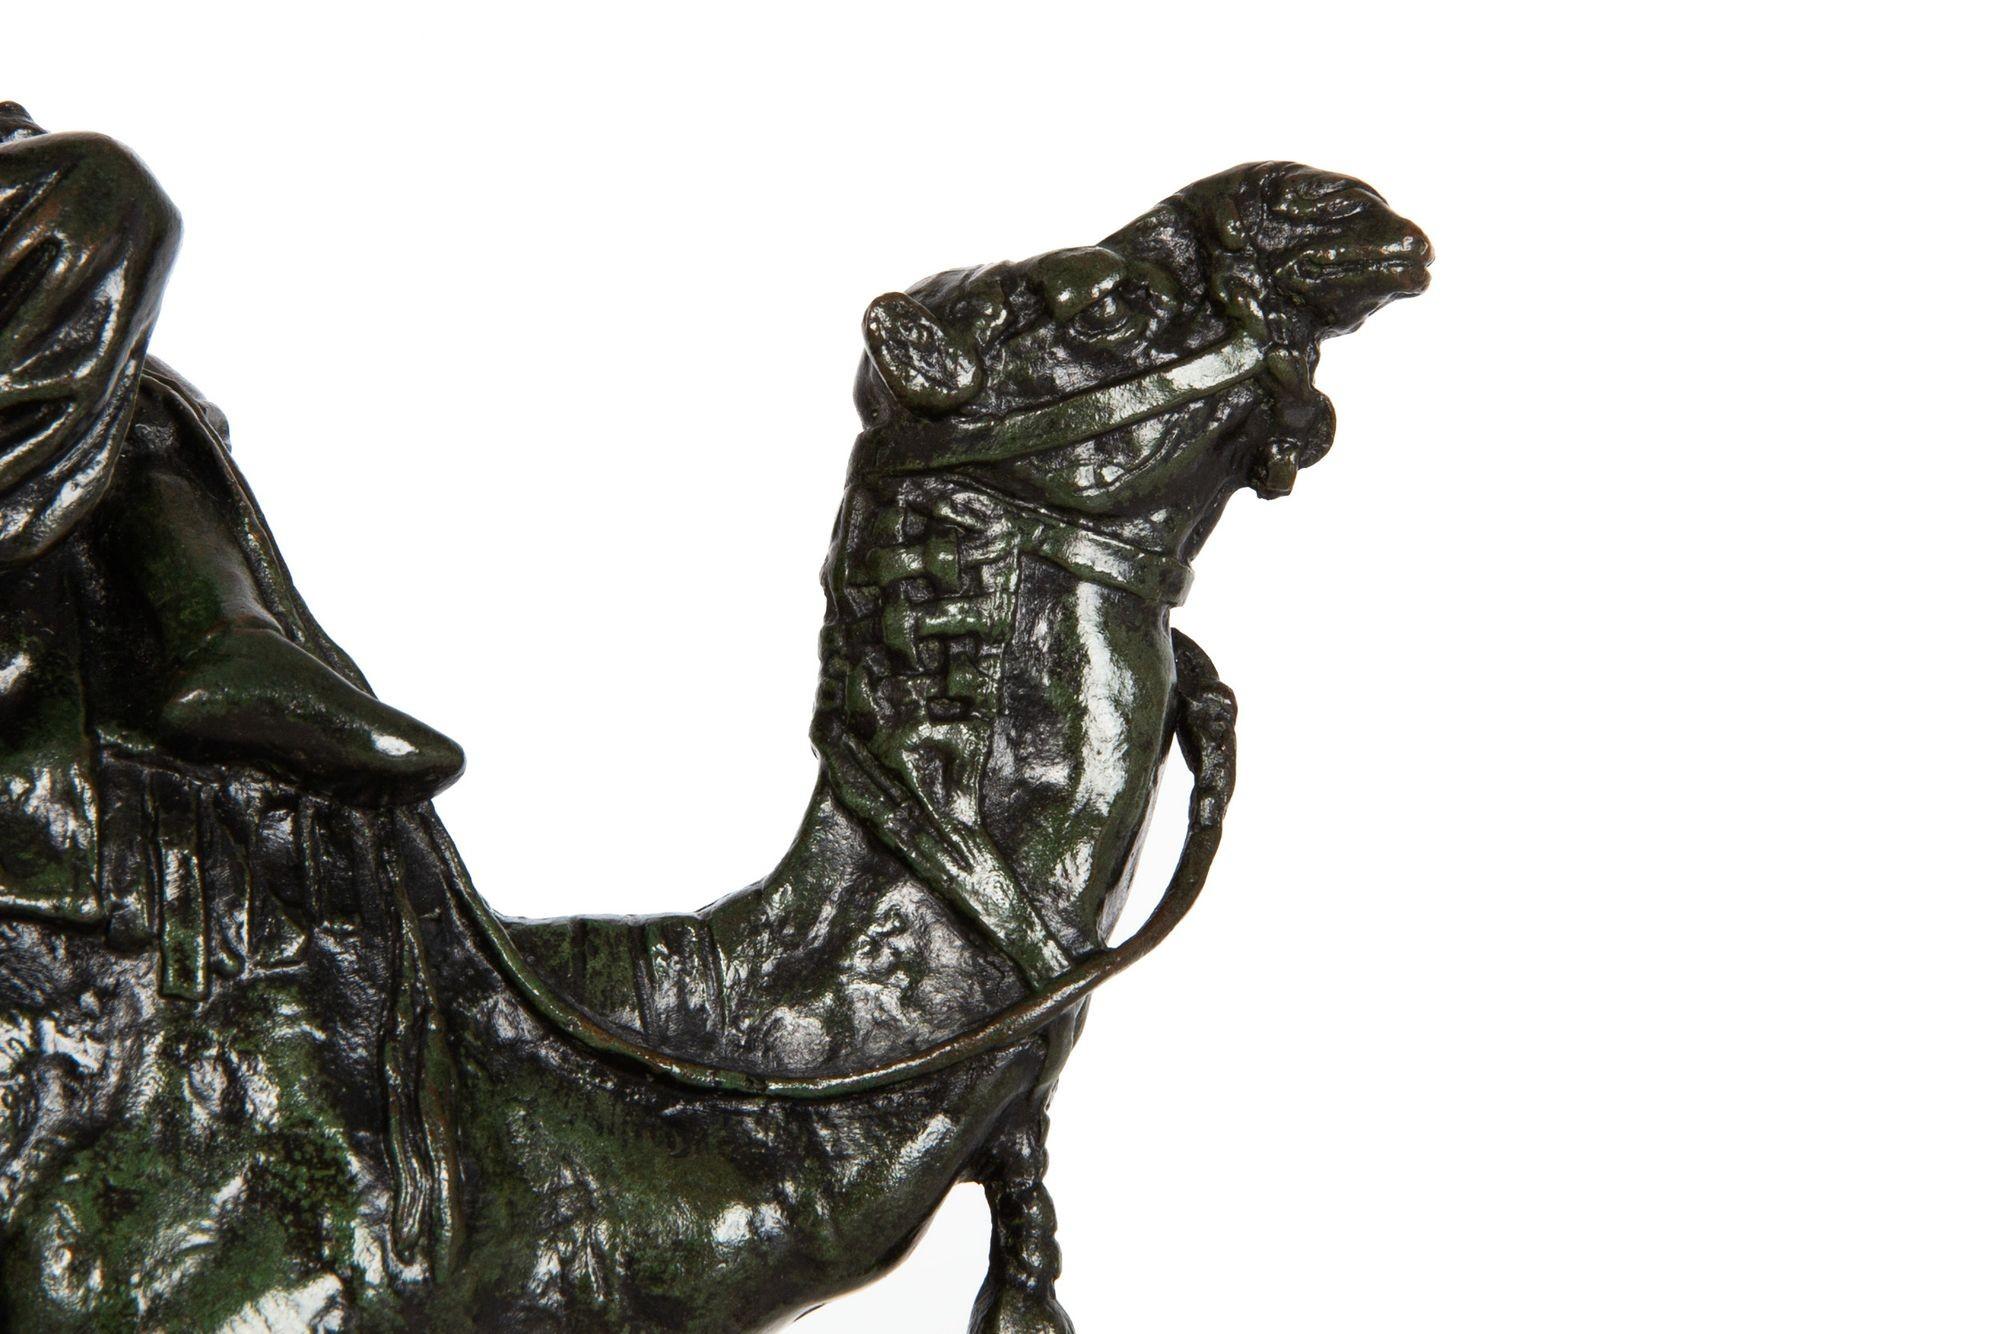 Rare Bronze Sculpture of “Arab on Camel” by Antoine-Louis Barye circa 1880 For Sale 2